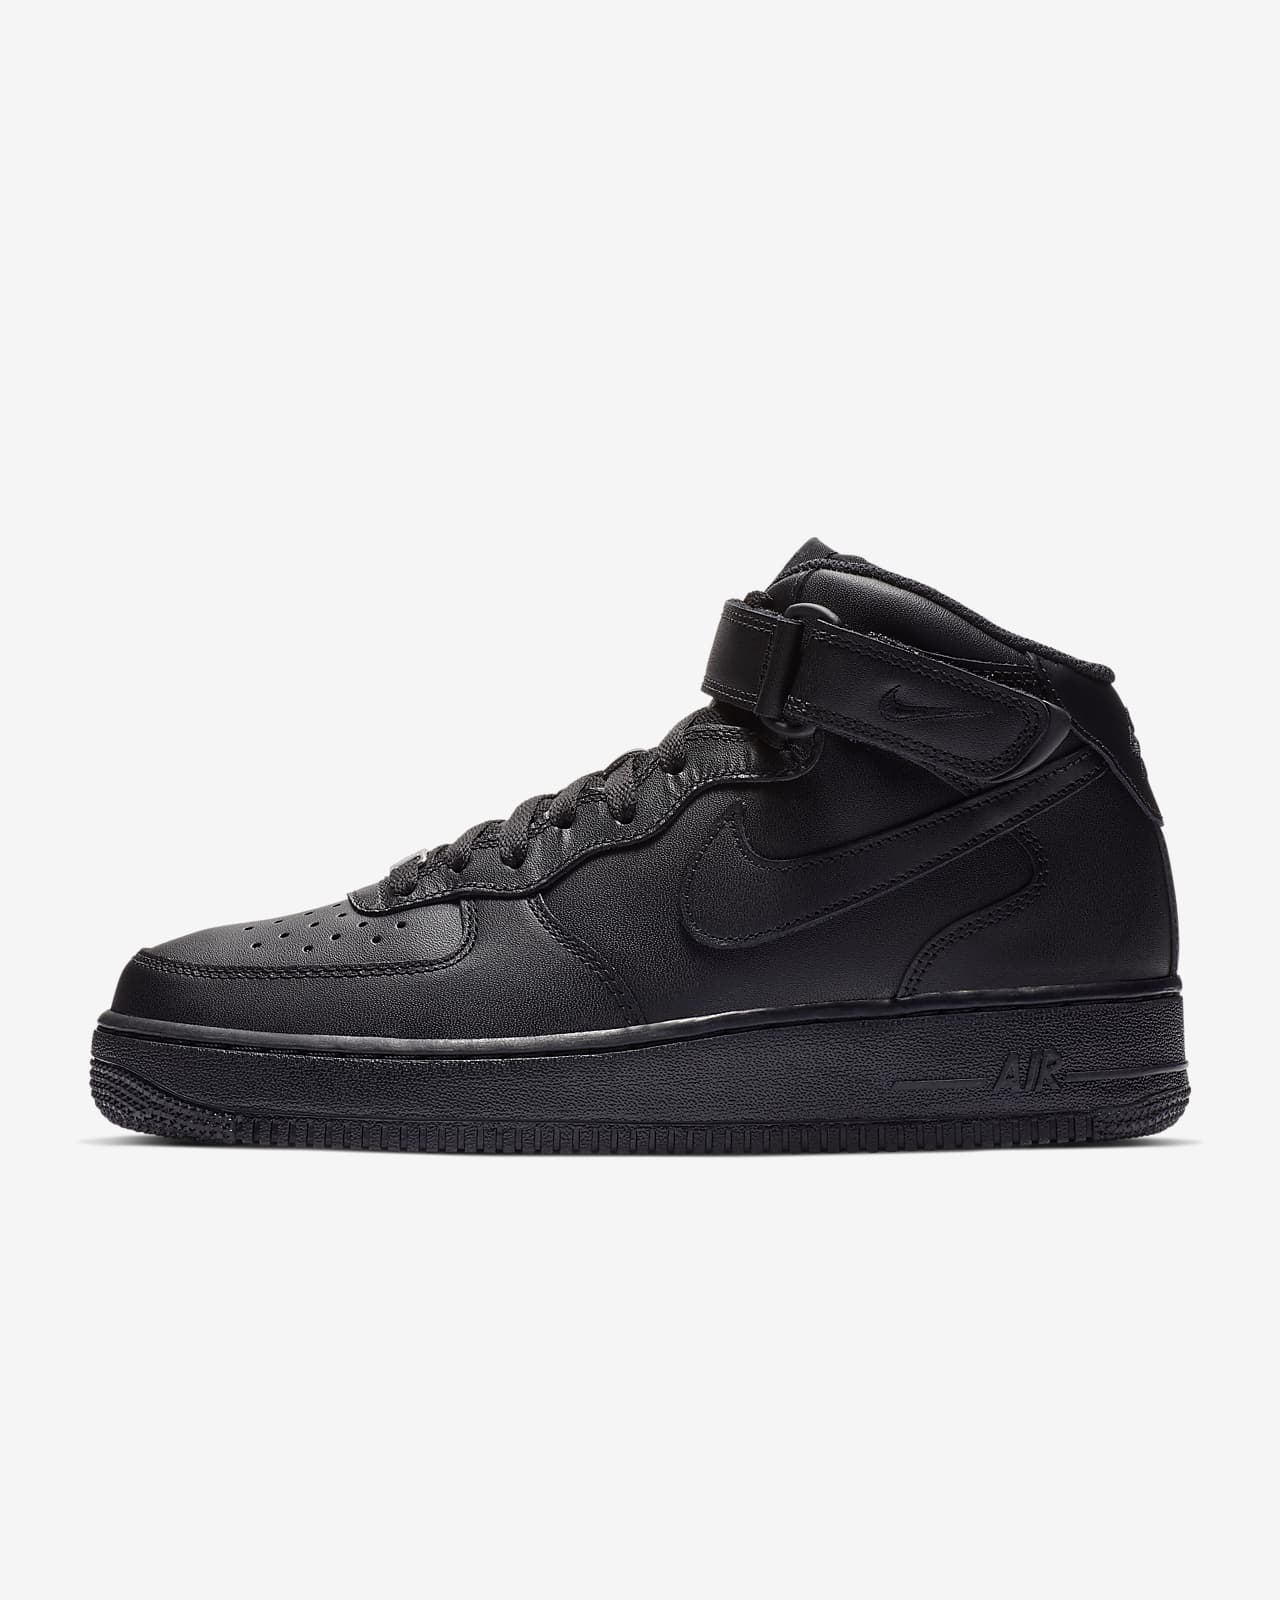 black air force ones with white bottom